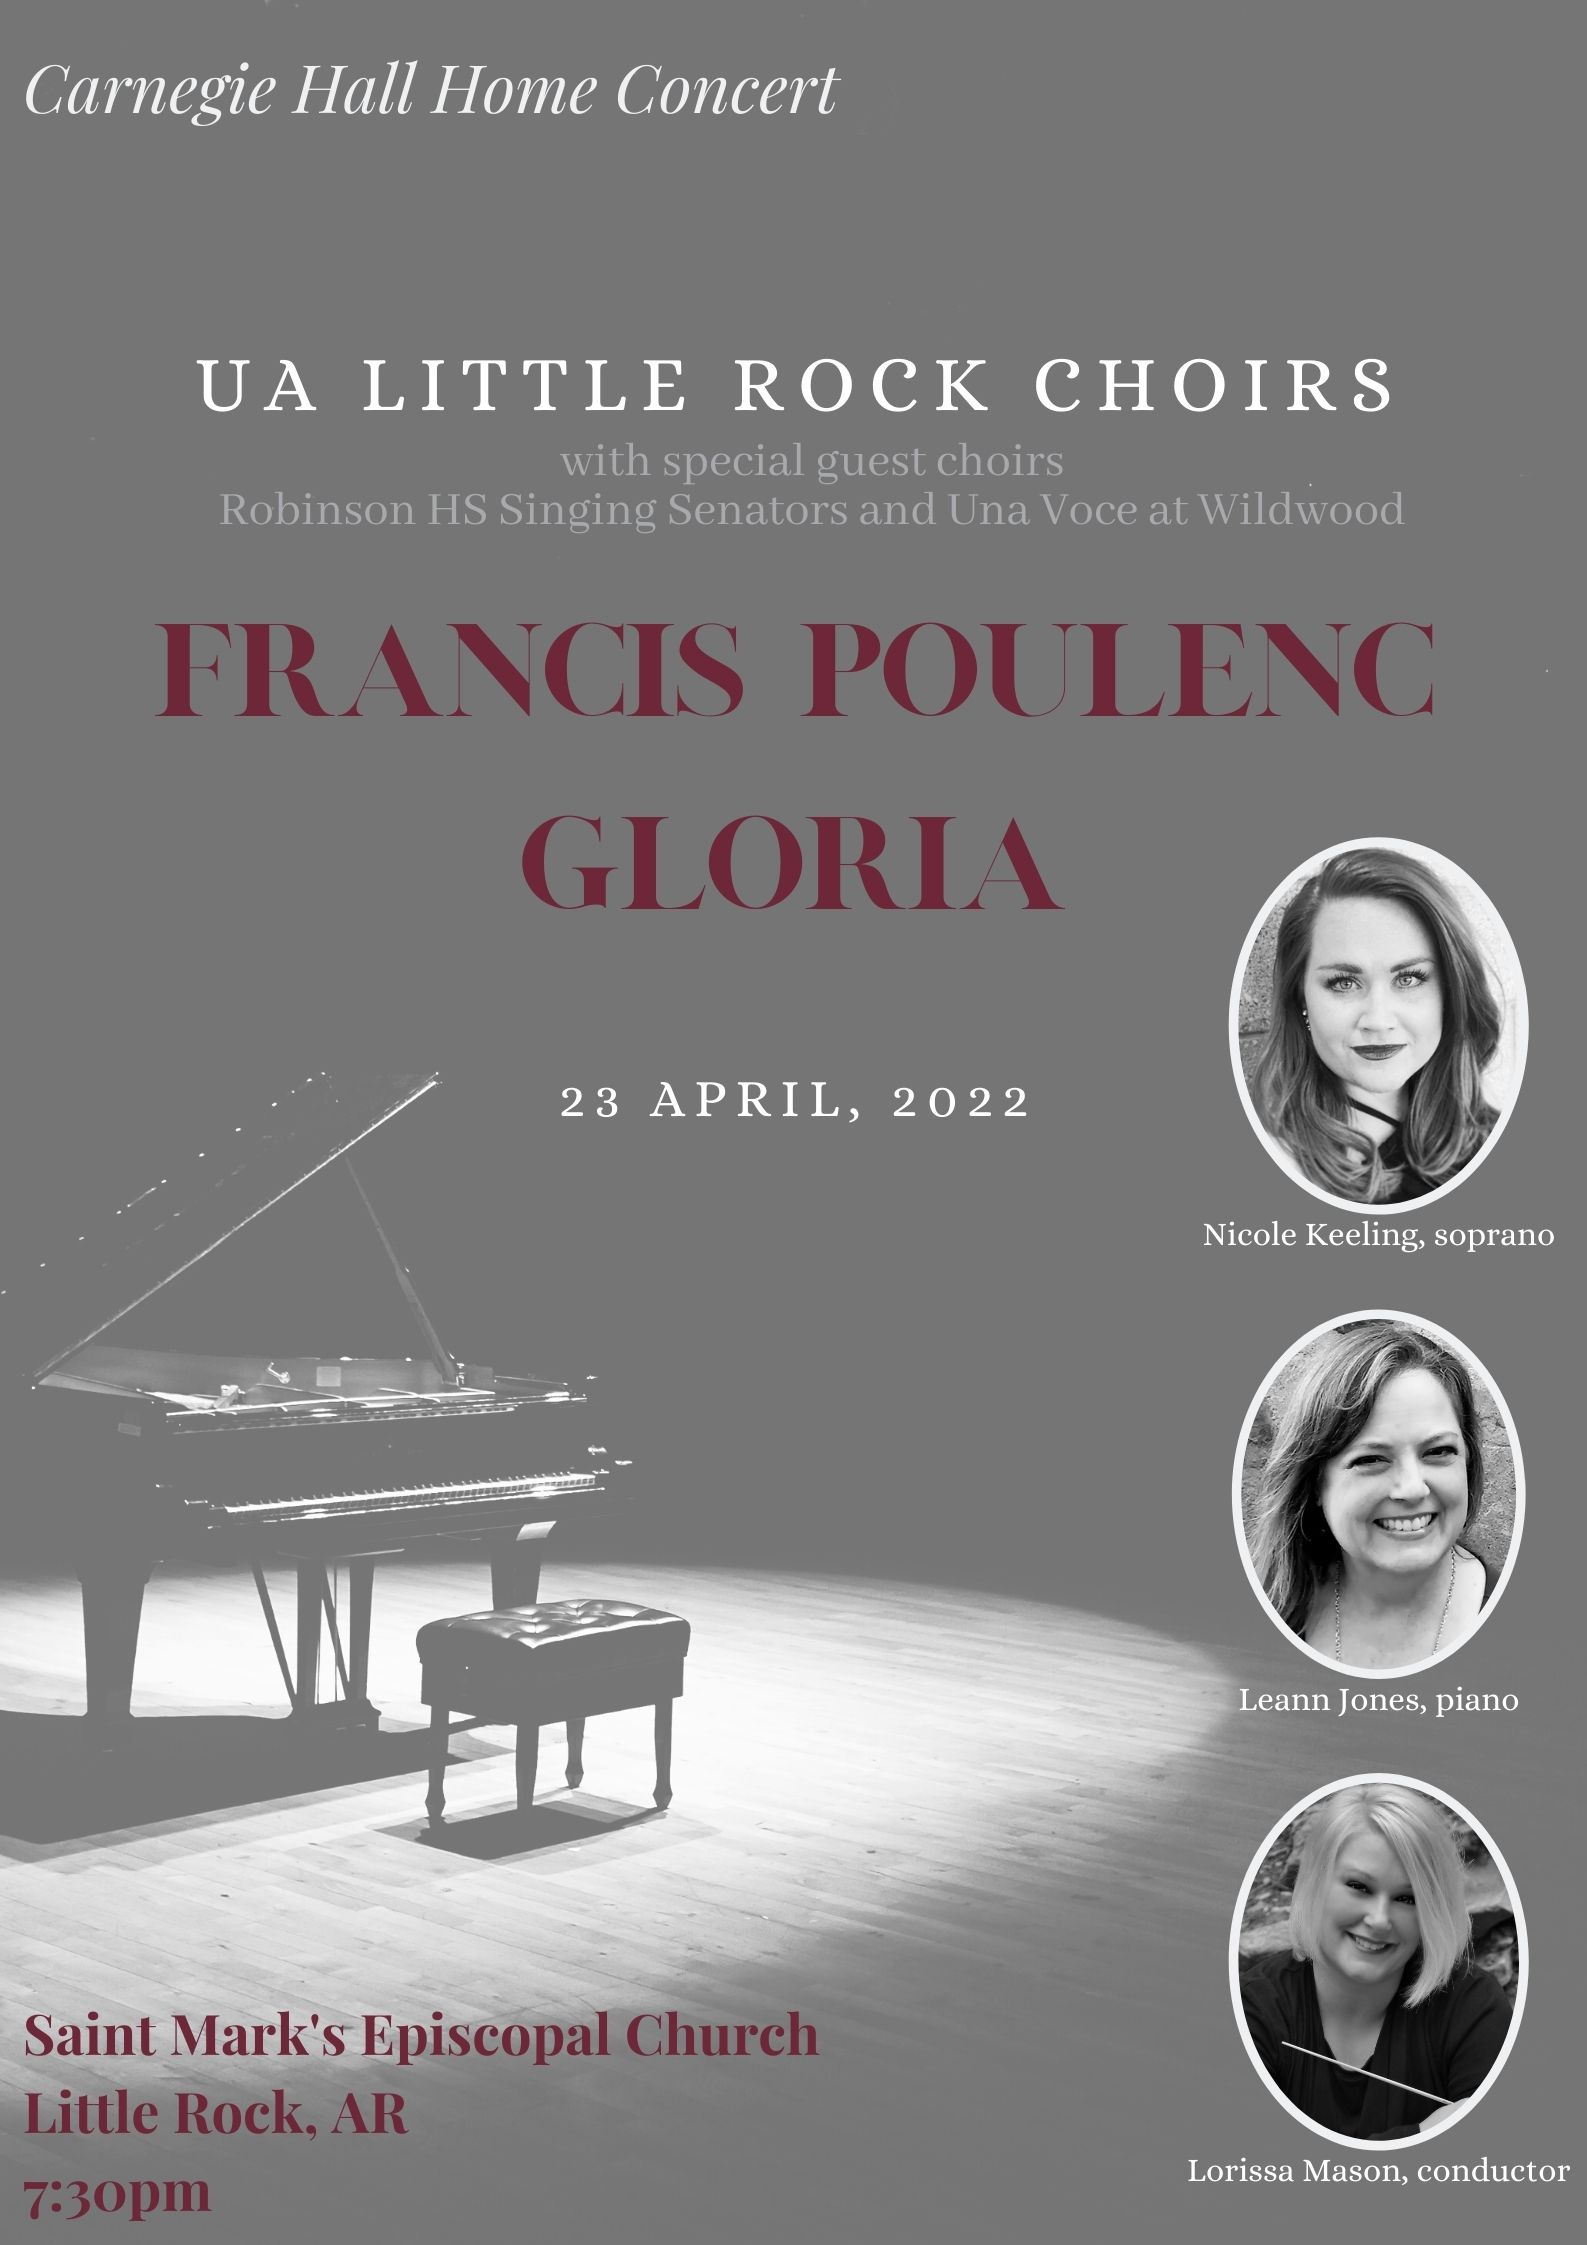 The University of Arkansas at Little Rock Choirs will hold a special concert performance of Francis Poulenc’s masterwork “Gloria” at 7:30 p.m. Saturday, April 23, at Saint Mark’s Episcopal Church, 1000 N. Mississippi St., Little Rock.